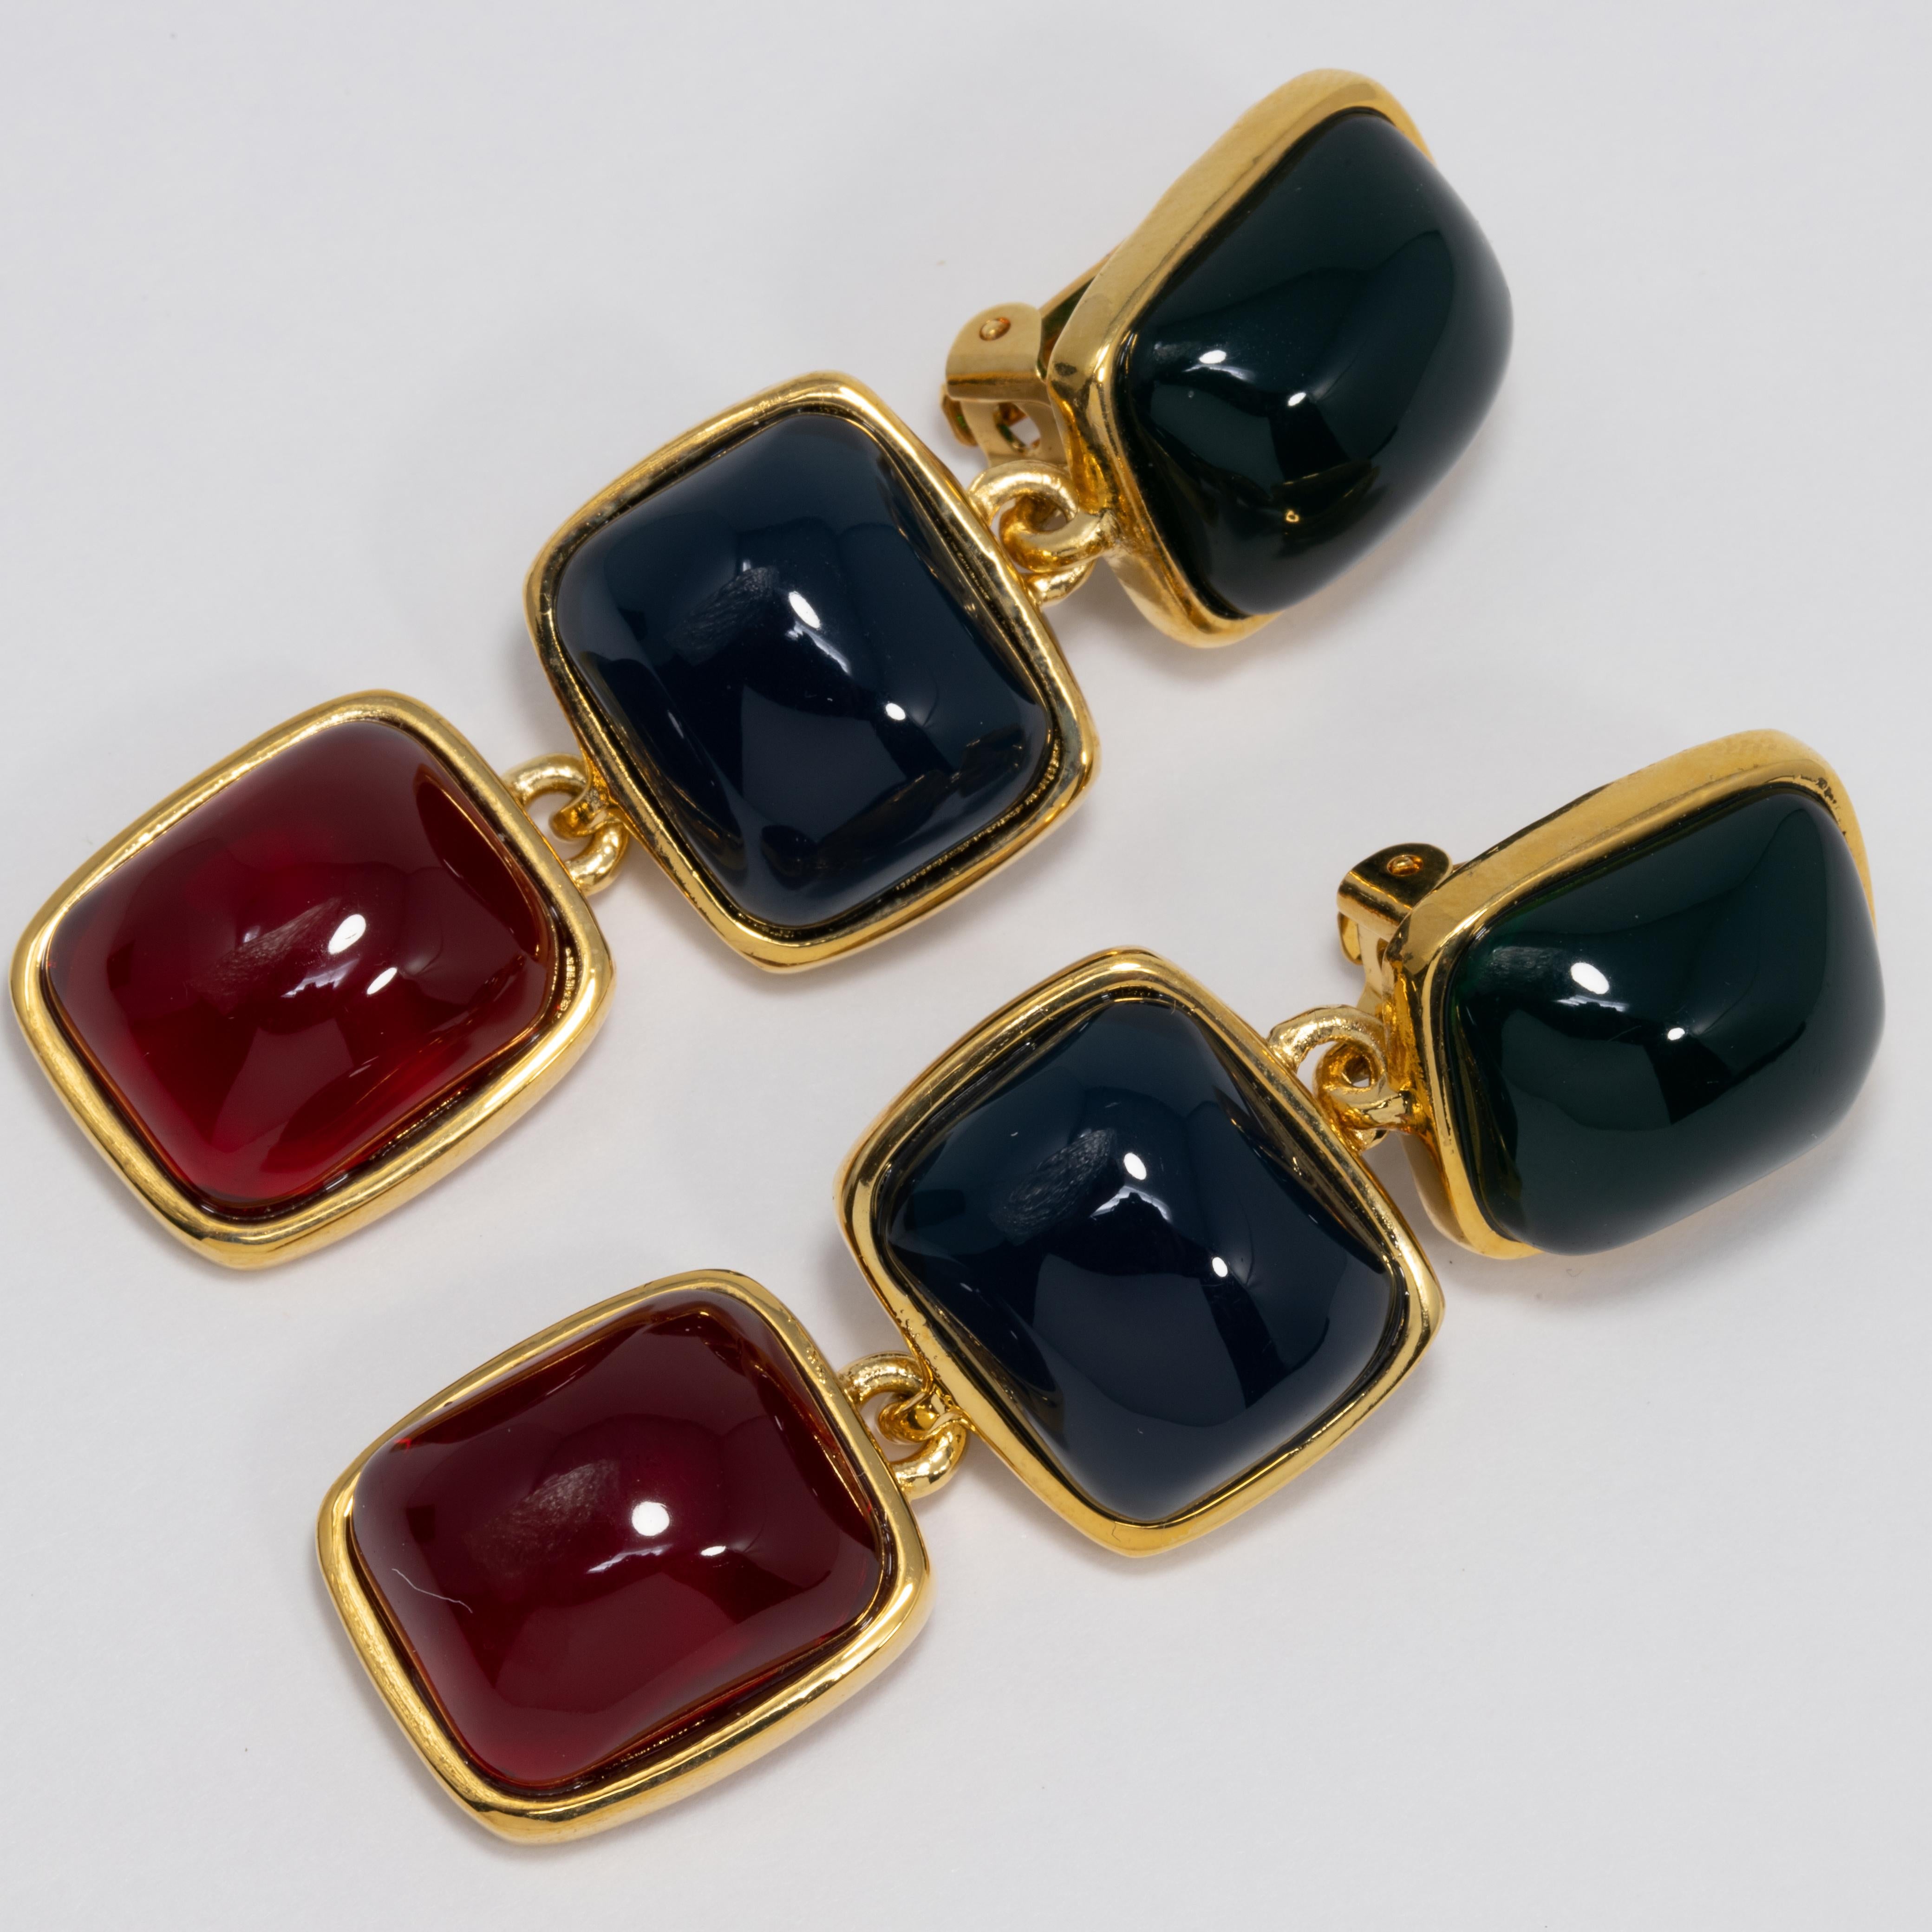 Stylish Kenneth Jay Lane earrings, featuring opaque green, red, and blue cabochons set in open-back gold-plated bezels. 


Hallmarks: KJL, China